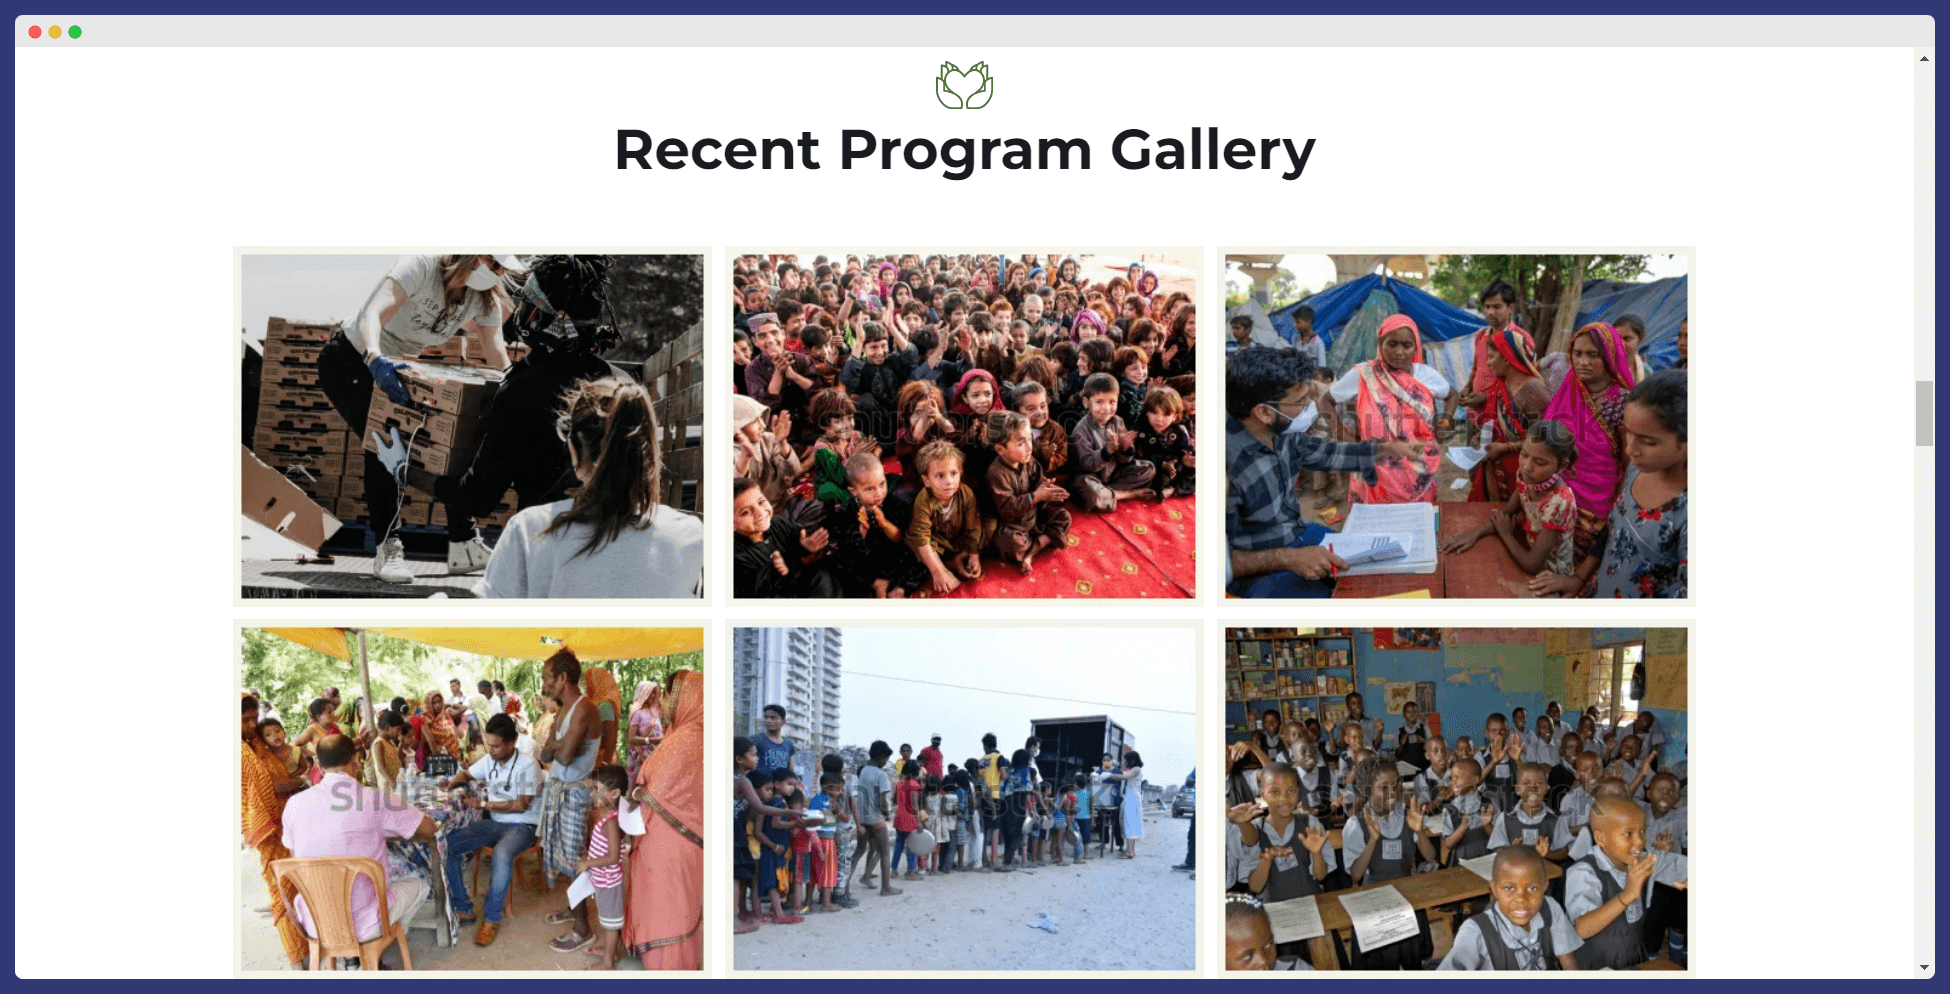 recent program gallery section of nonprofit website template